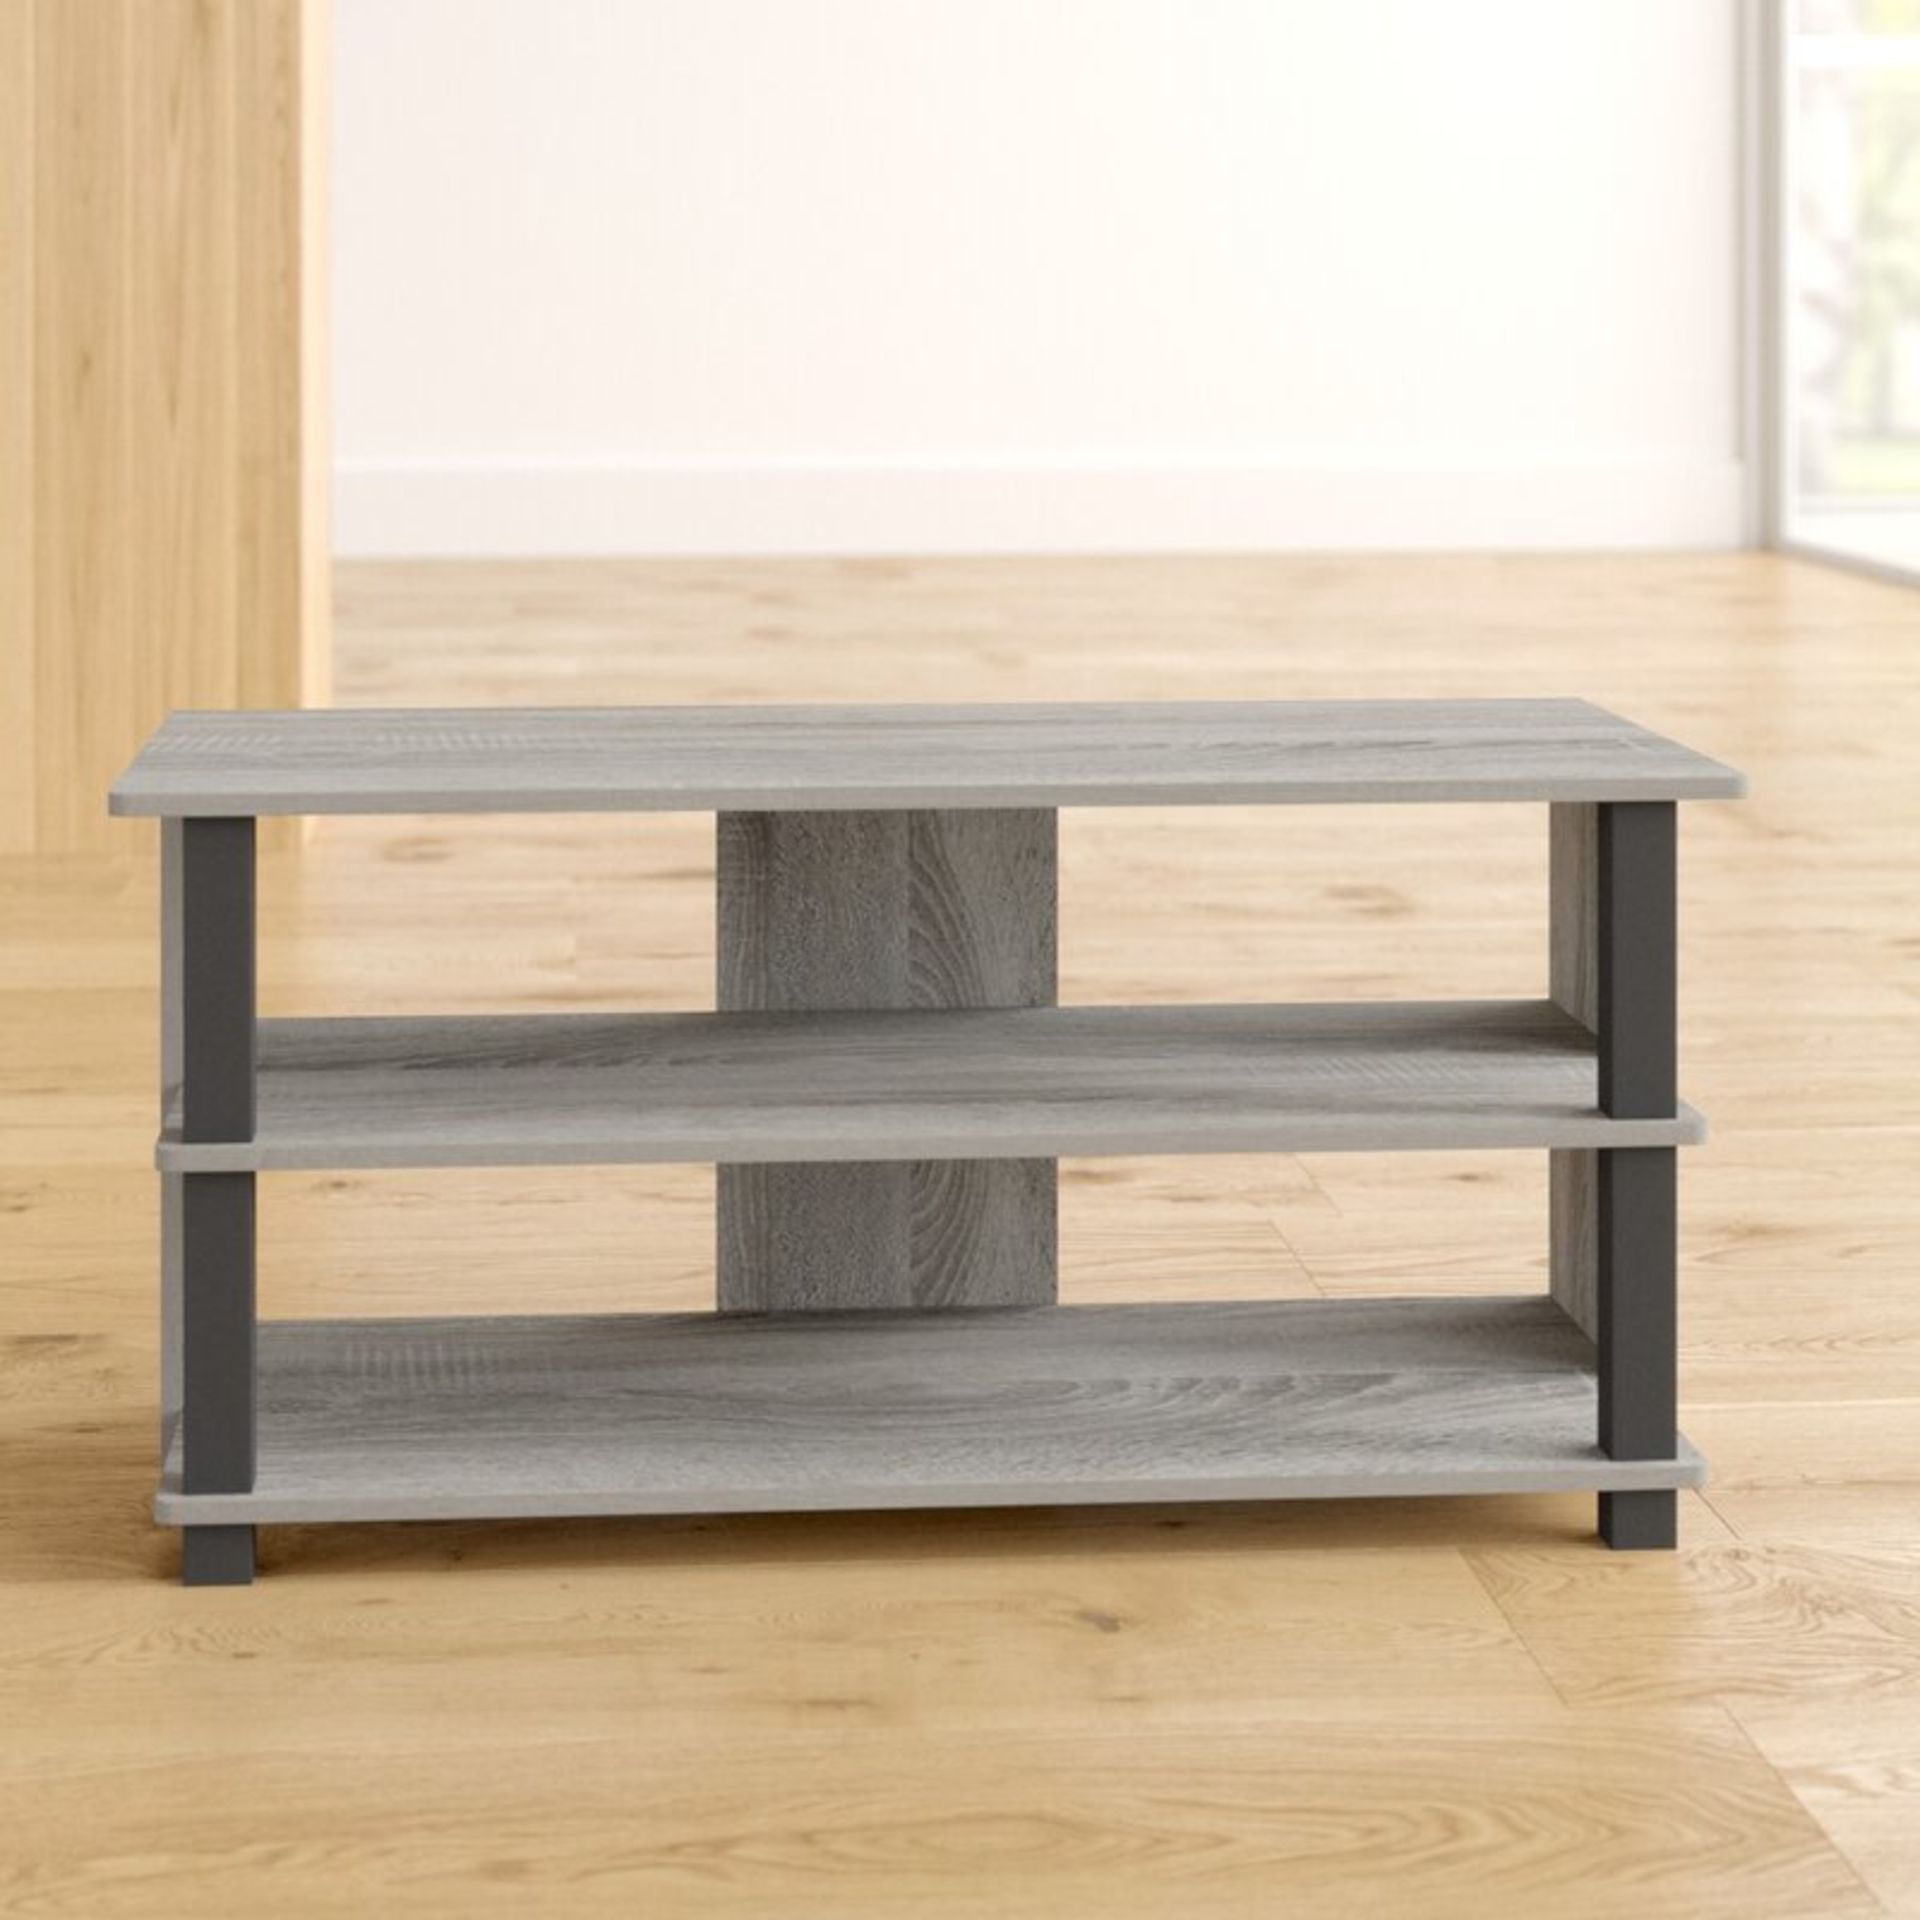 Antonelli TV Stand for TVs up to 40" - RRP £49.99 - Image 2 of 2